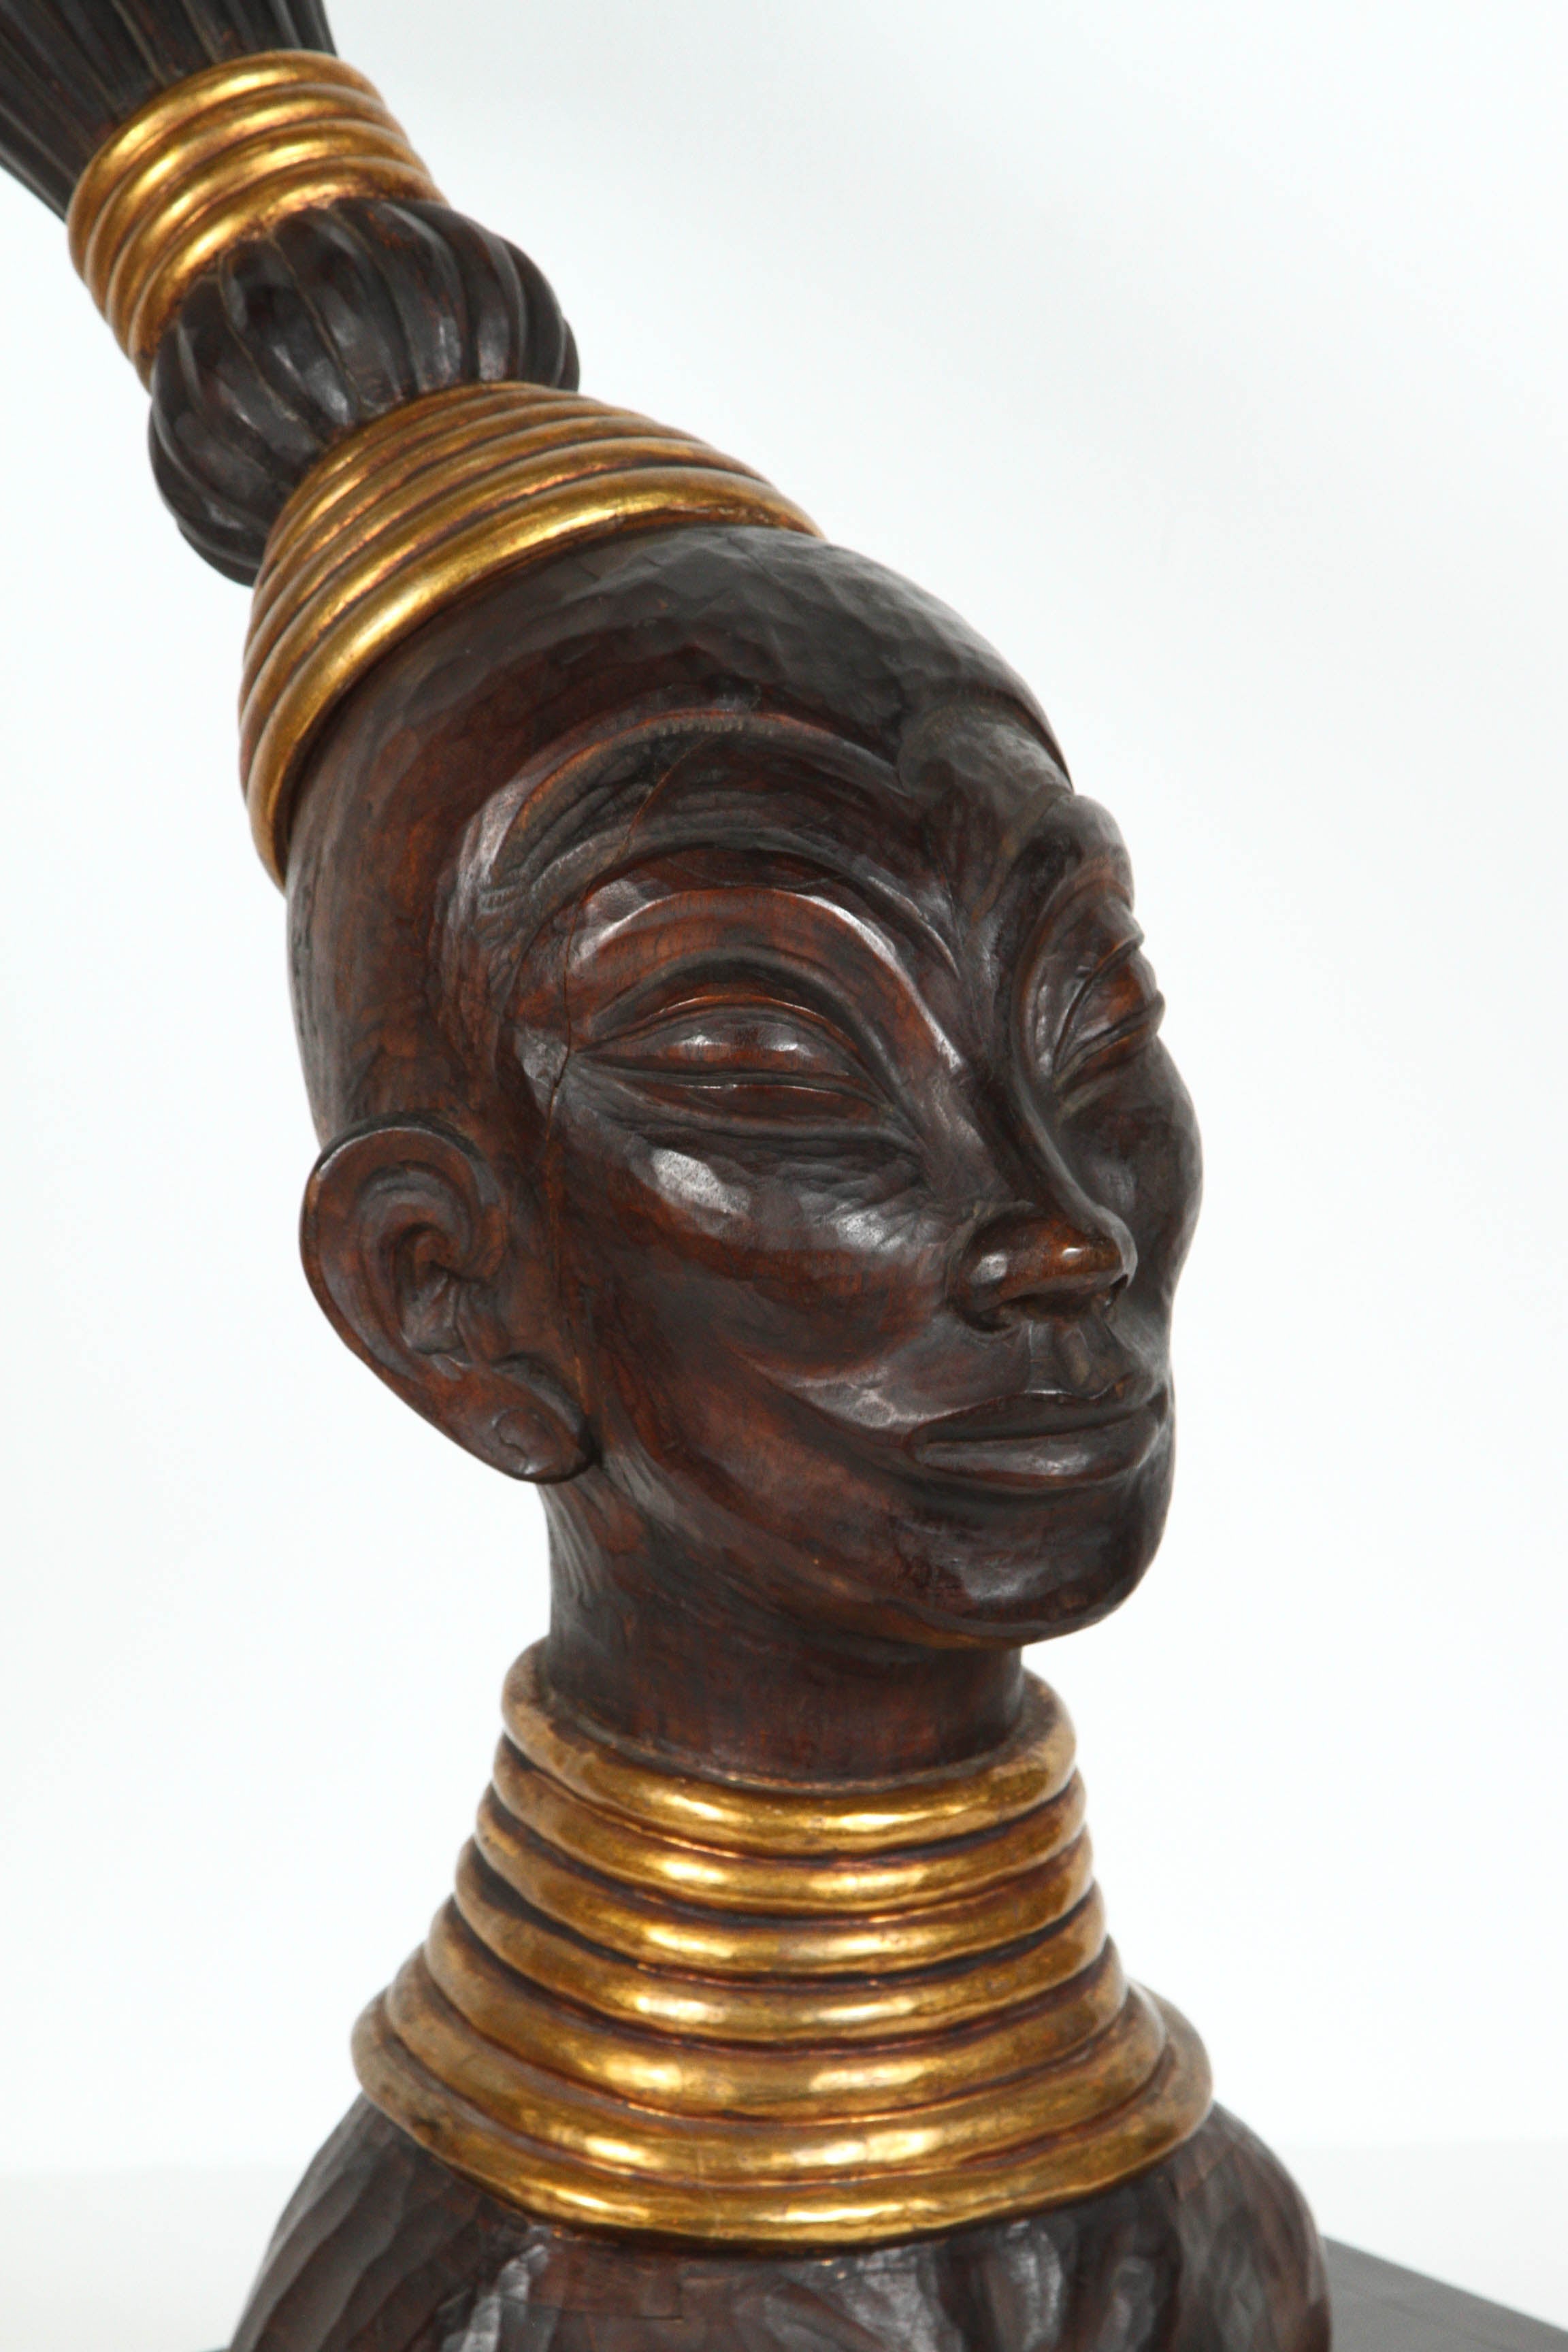 Hand-carved tribal wooden Zulu African head, very nicely carved with gold embellished jewelry and traditional hair style and gold head dress.
Large contemporary bust sculpture 30